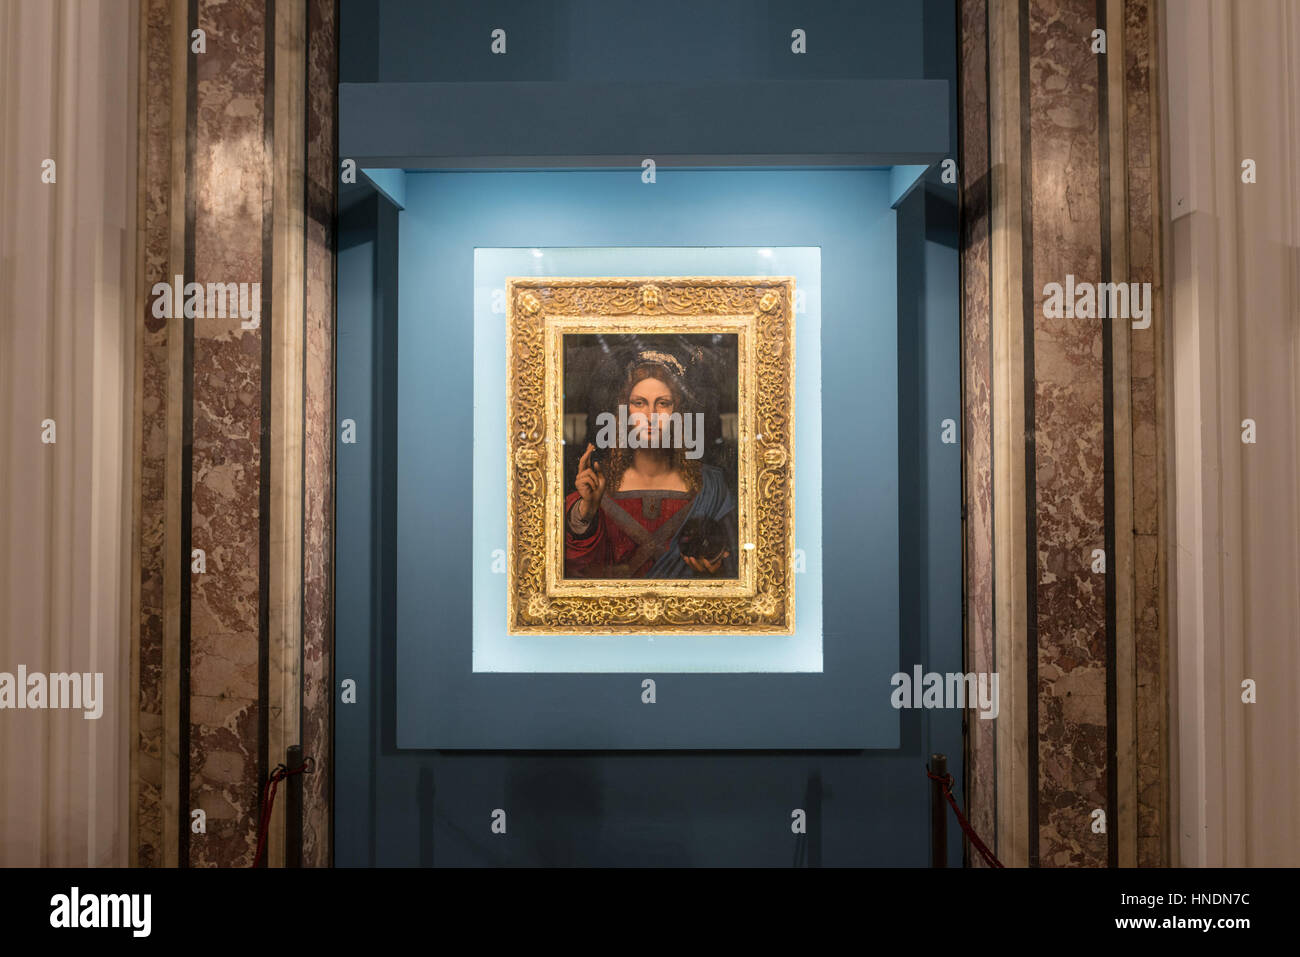 The controversial masterpiece by Leonardo Da Vinci 'Salvator Mundi' arrives in Naples, at the Diocesan Museum of Donnaregina  Where: Naples, NA, Italy When: 11 Jan 2017 Credit: IPA/WENN.com  **Only available for publication in UK, USA, Germany, Austria, Switzerland** Stock Photo